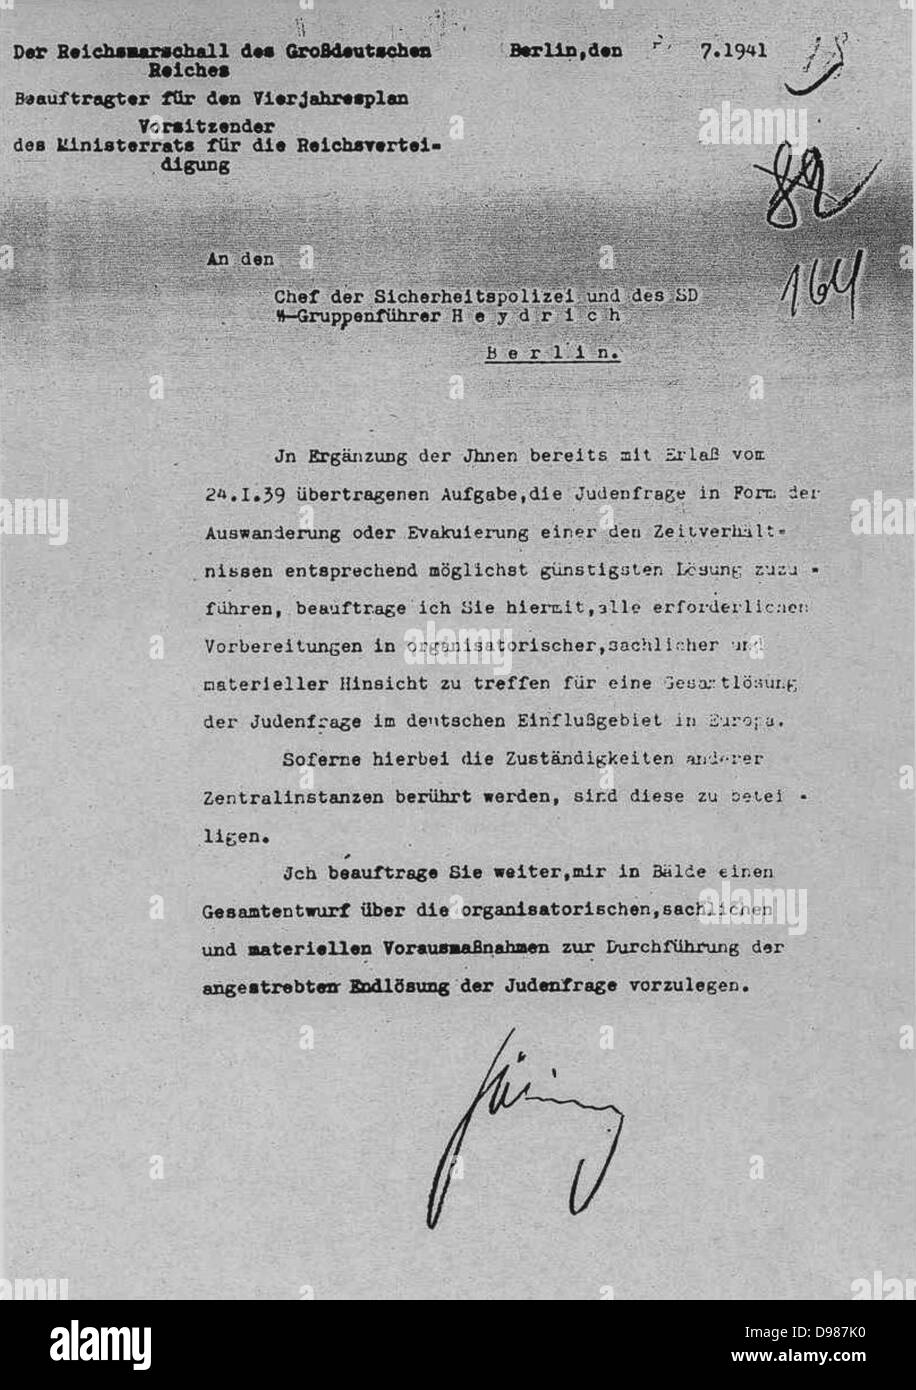 Herman Göring's (Goering) letter of 31 July 1941, to Reinhard Heydrich authorizing the Final Solution to the Jewish question. The Wansee Conference, 20 January 1942 informed the leaders of the Nazi departments dealing with Jewish policies that Heydrich was in charge of the Final Solution. Stock Photo